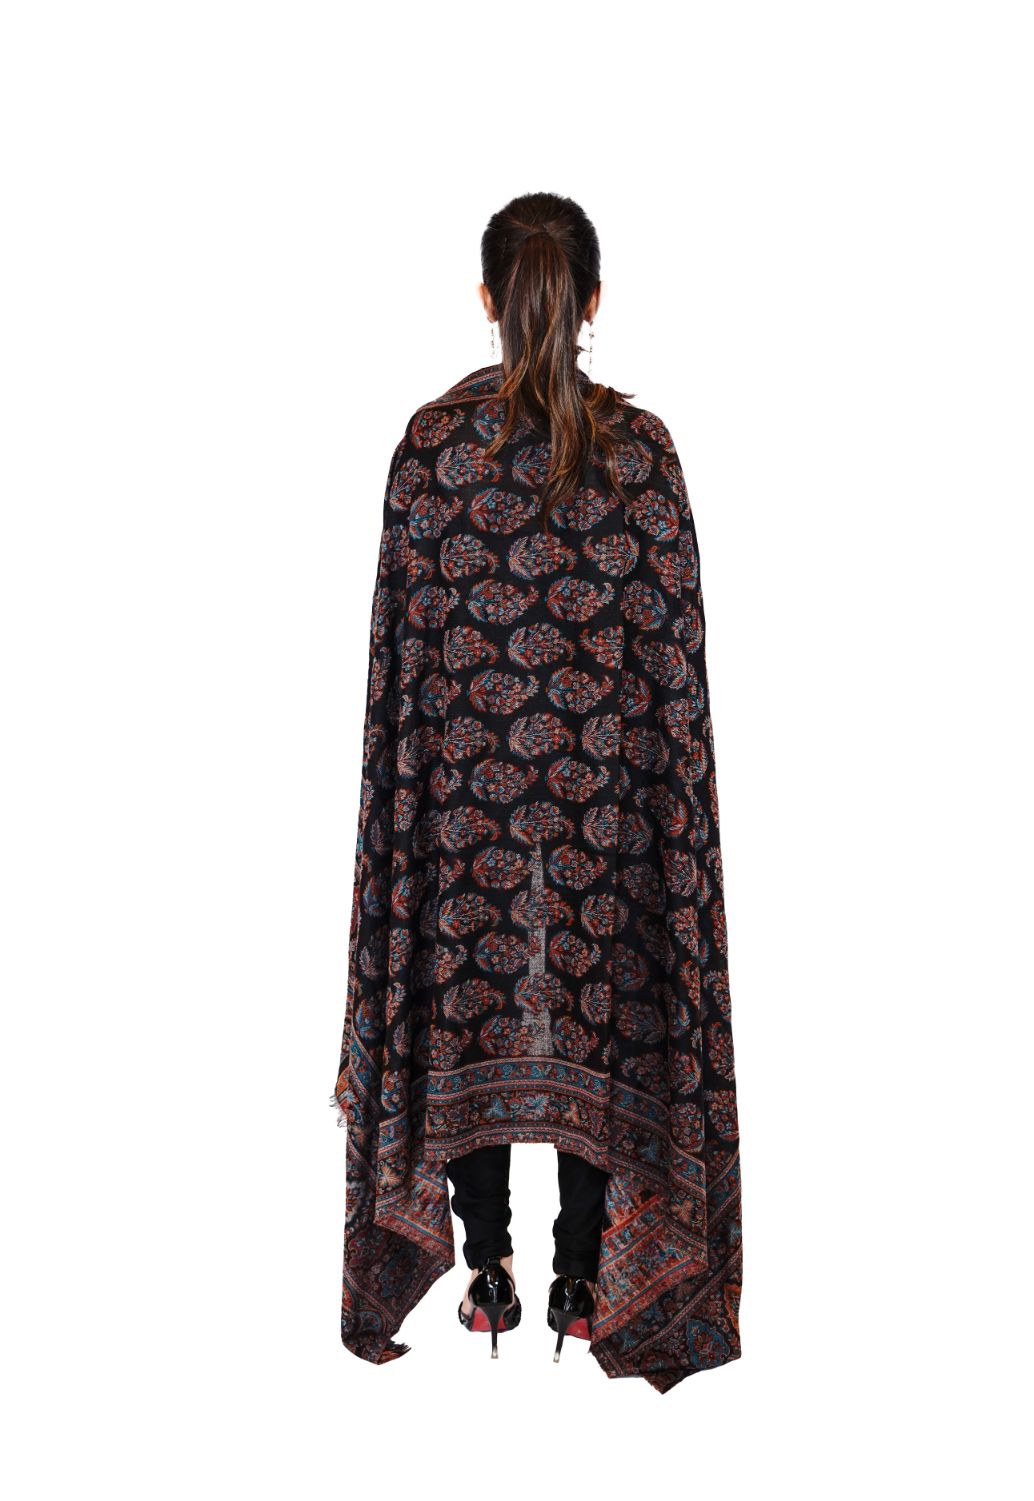 Women's Wool Blend Antique Shawl with Booti Design - Black Beauty